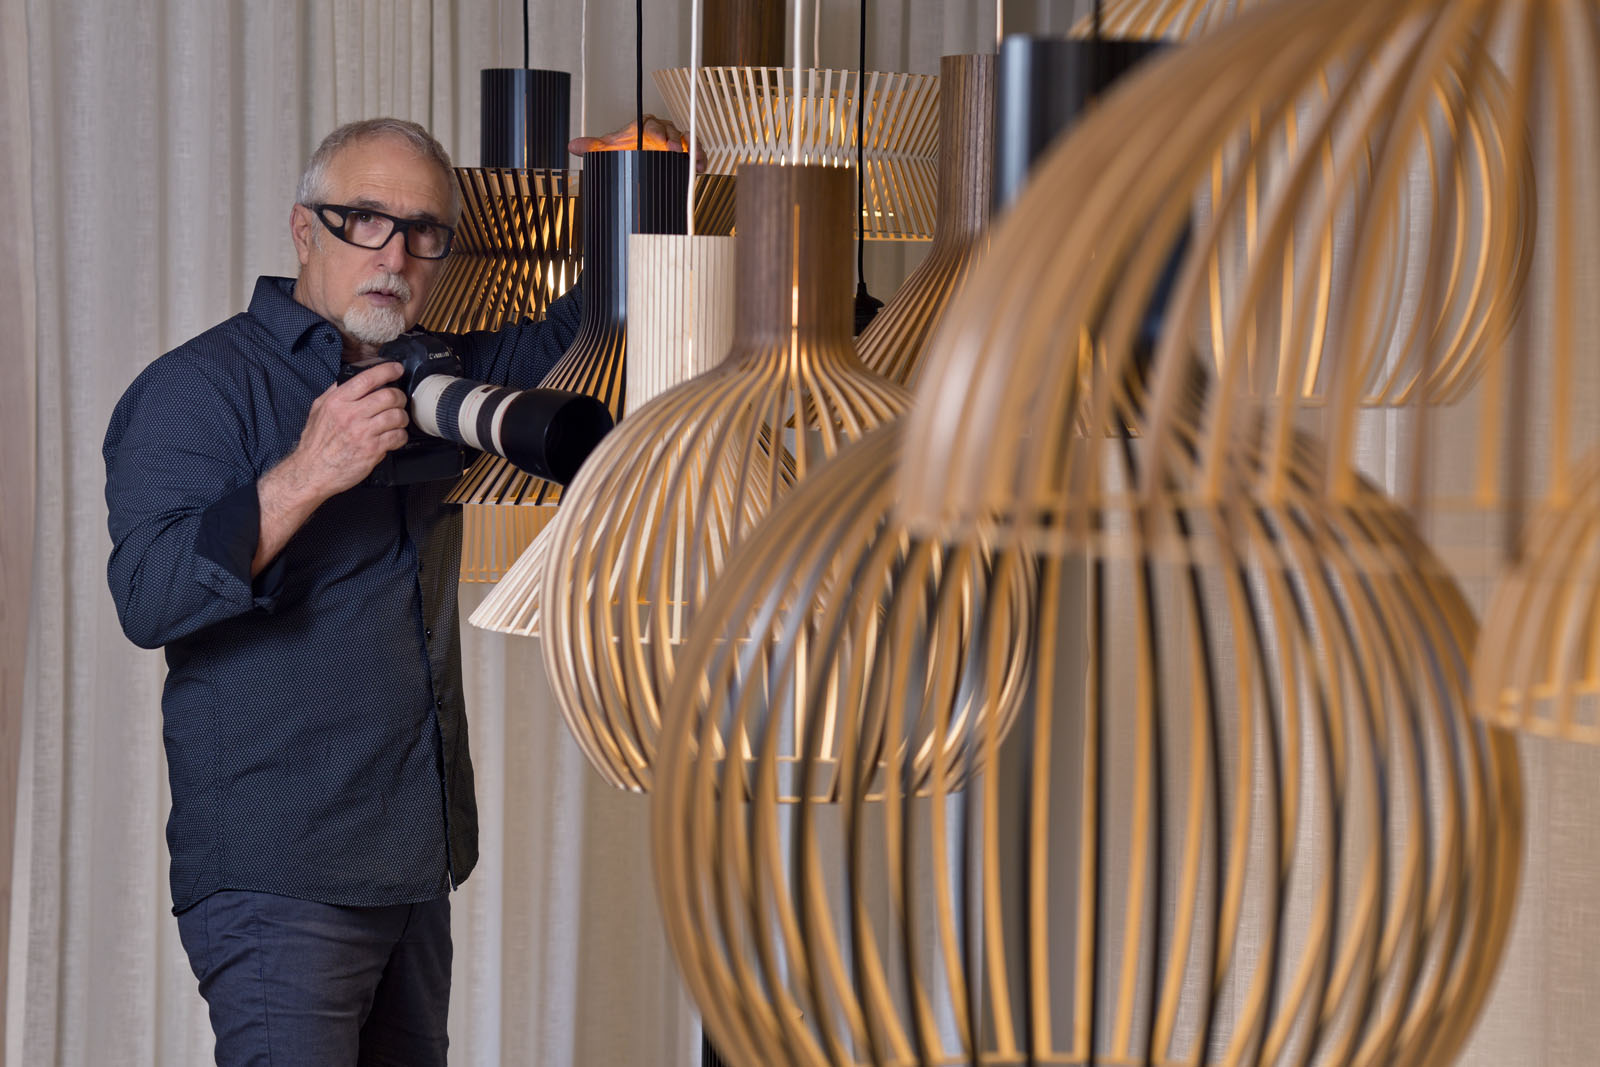 A photographer next to a group of Secto Design lamps.